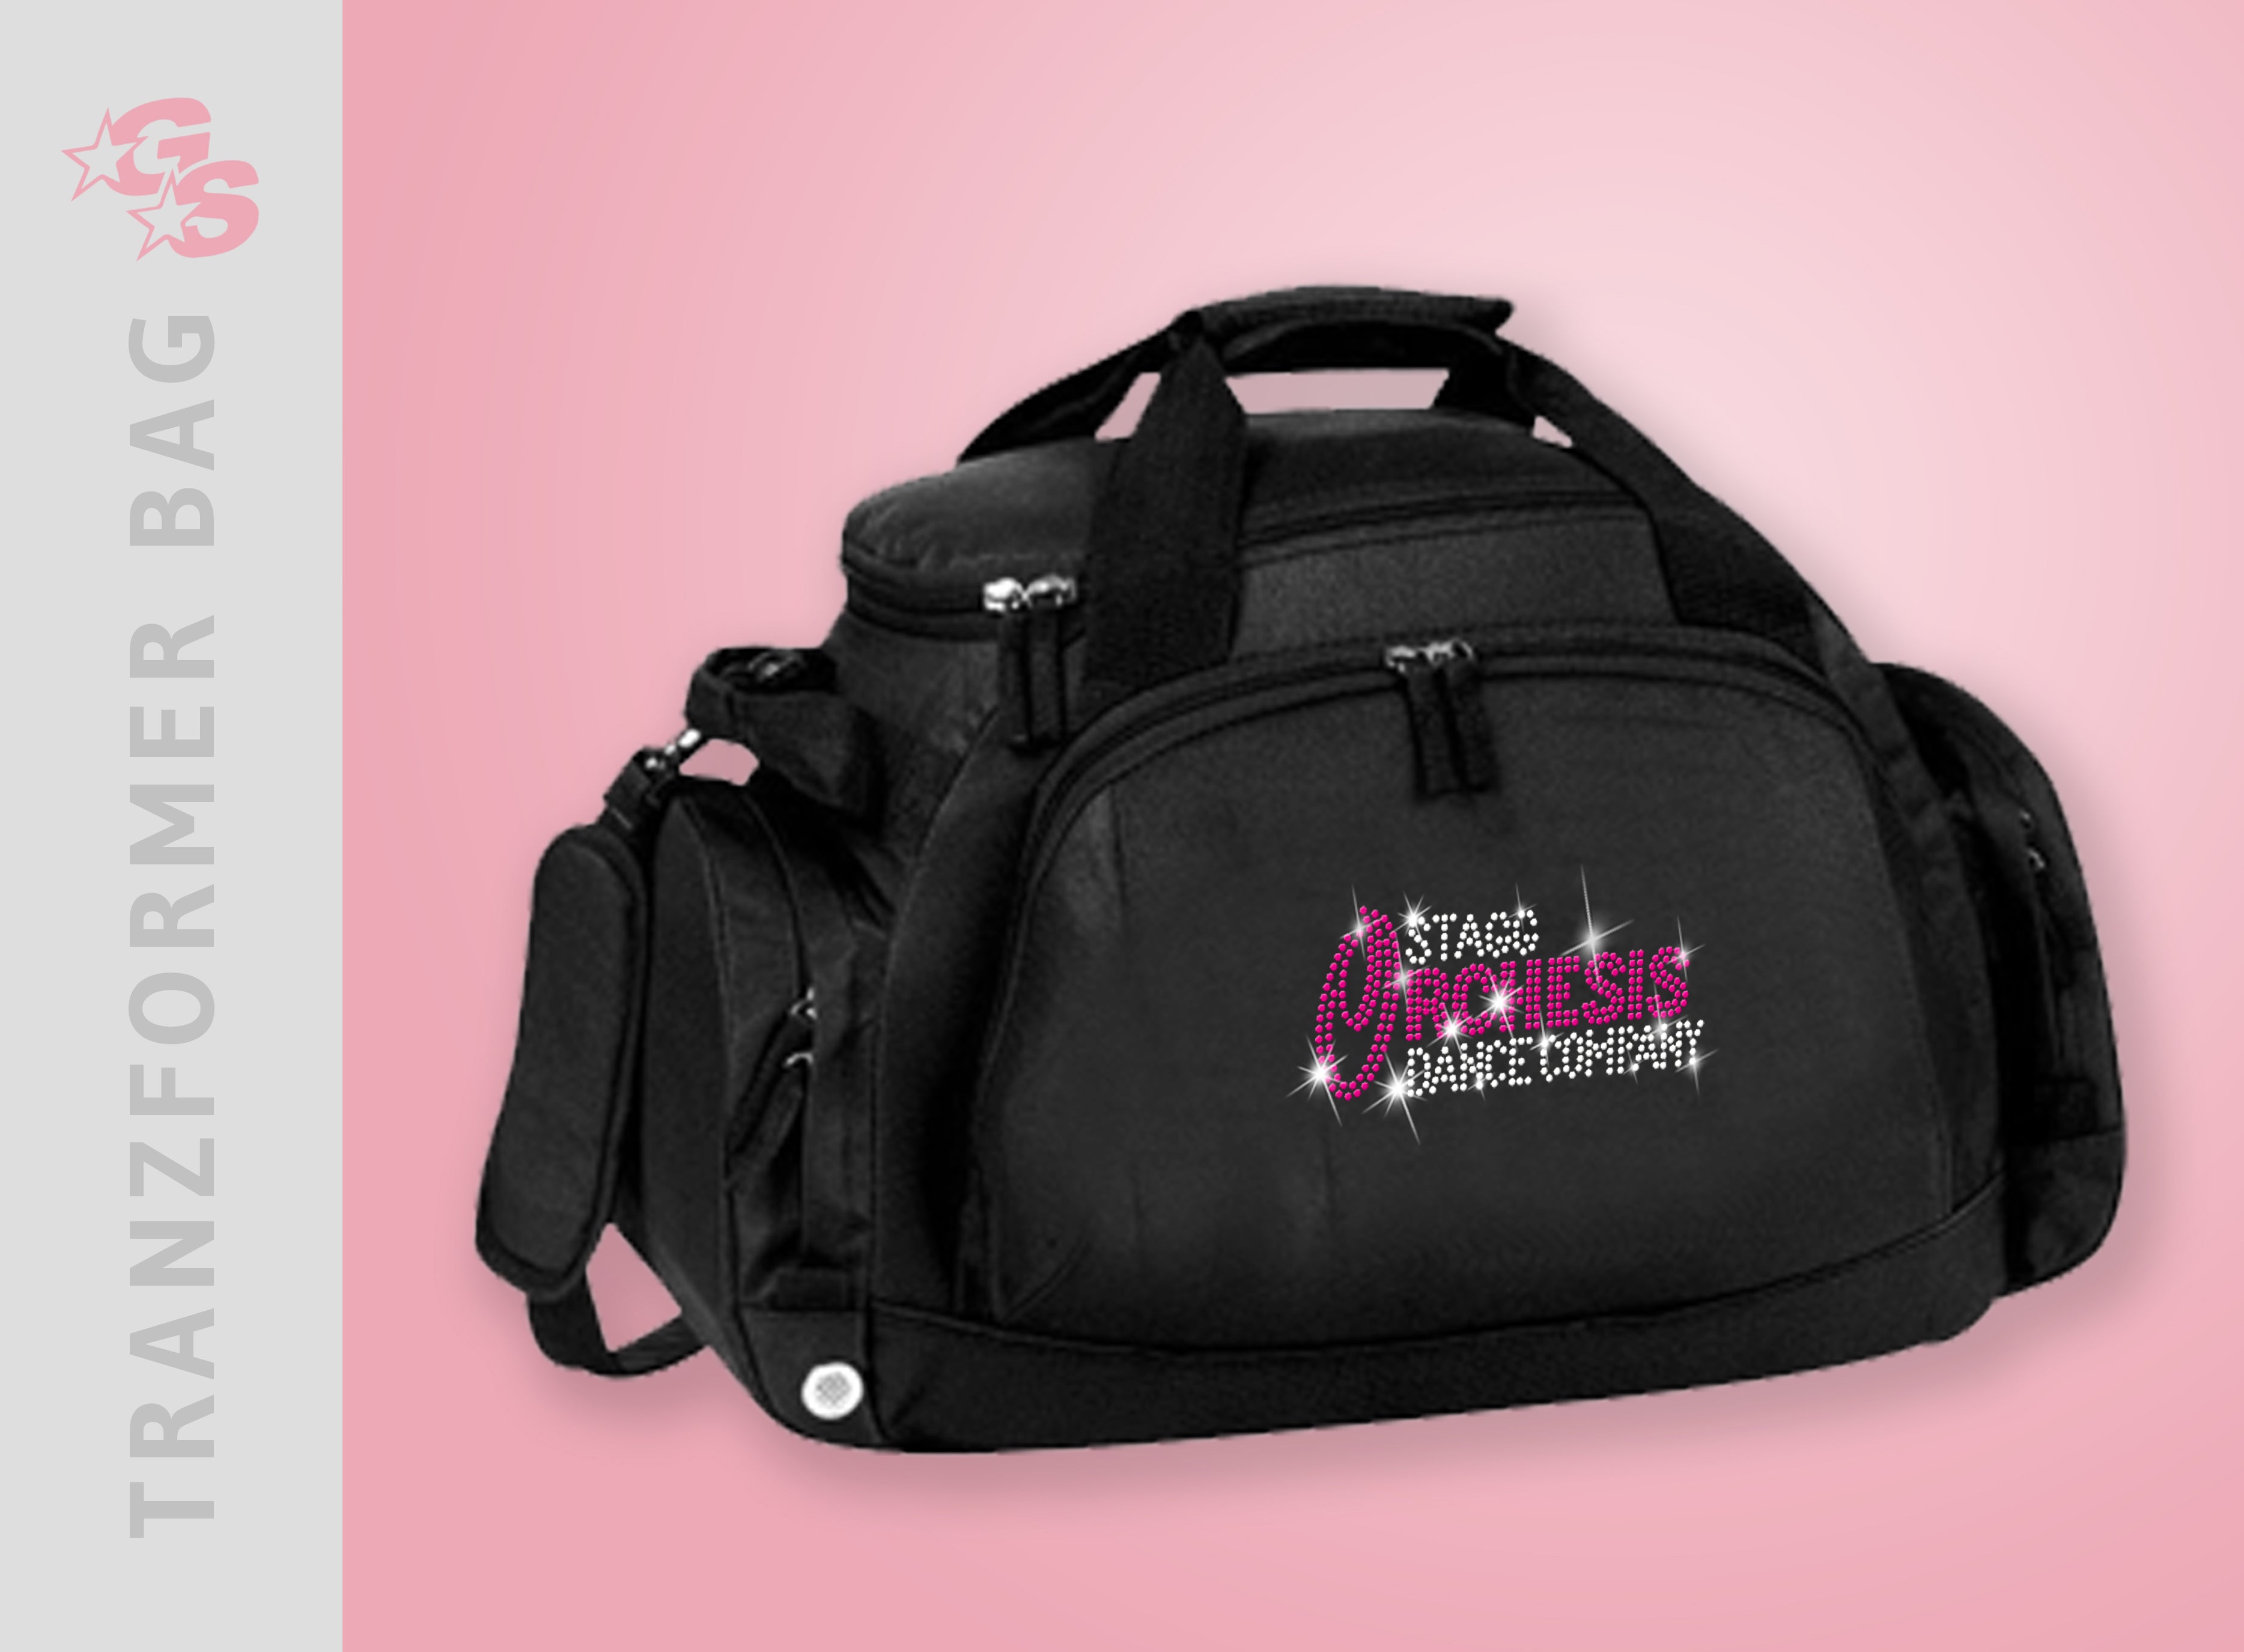 Stagg Orchesis Dance Company Tranzformer Bag